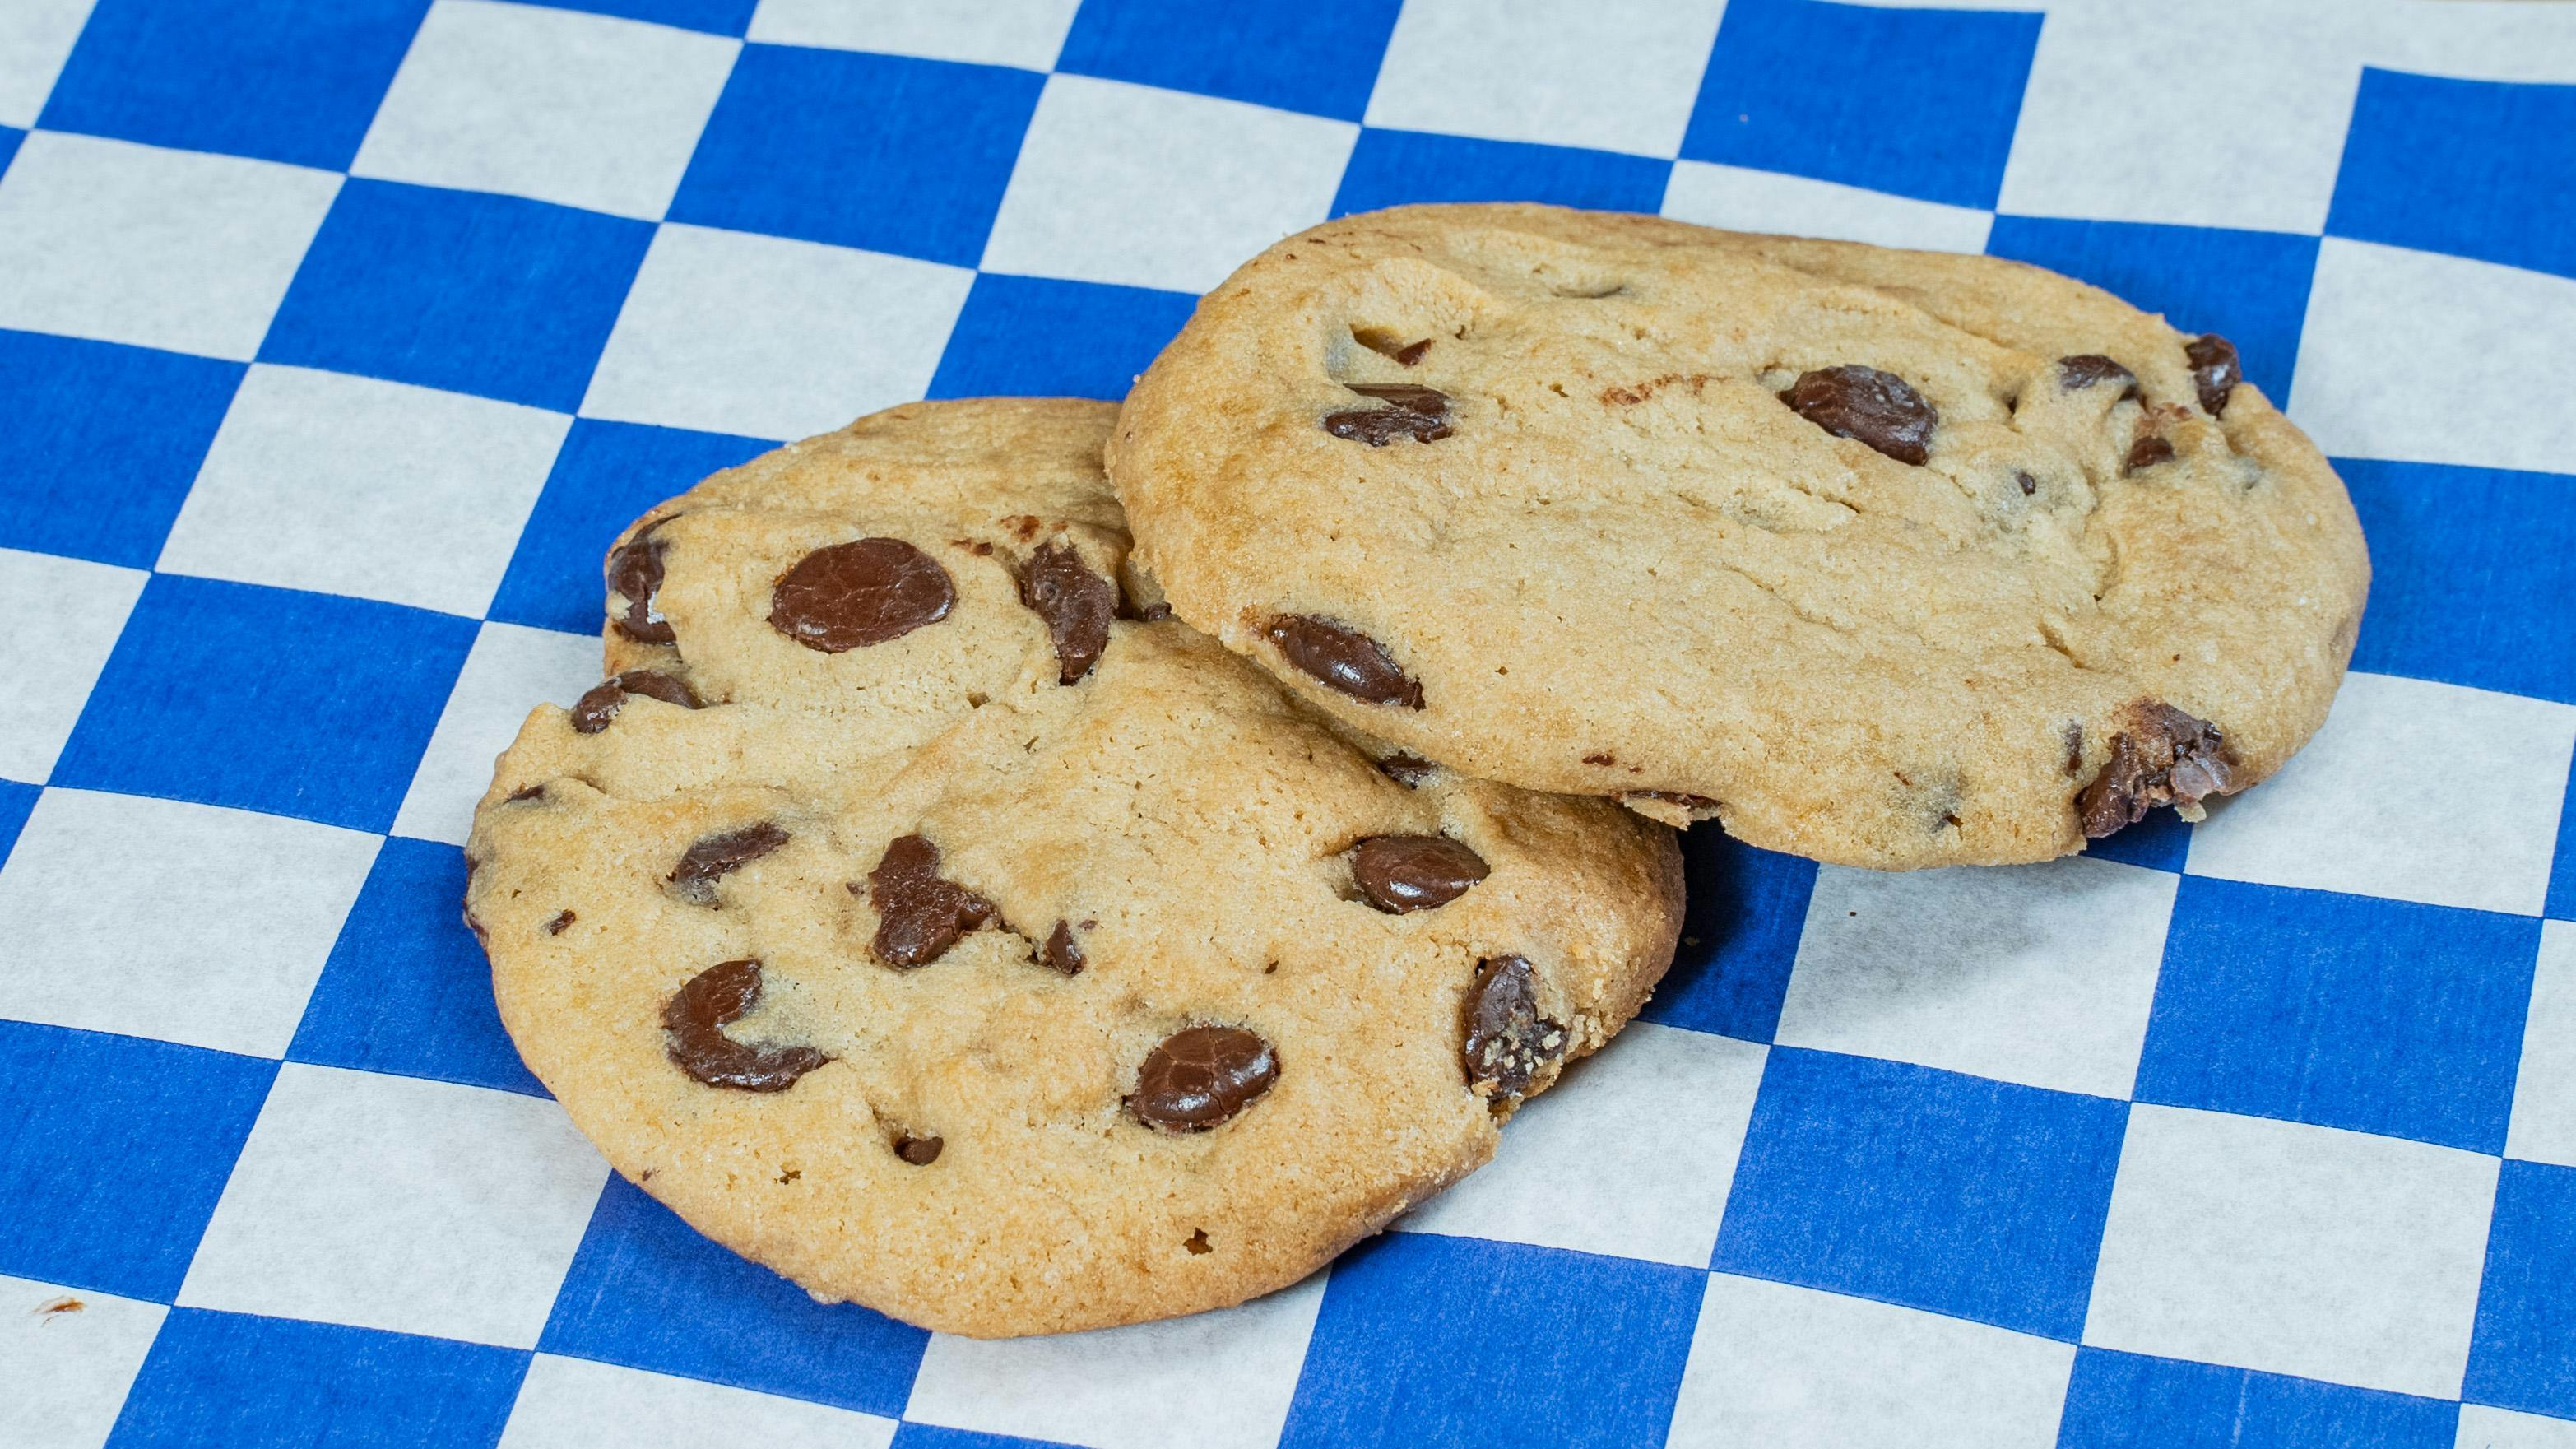 Chocolate Chip Cookies from Austin Burger Company - East 6th St in Austin, TX